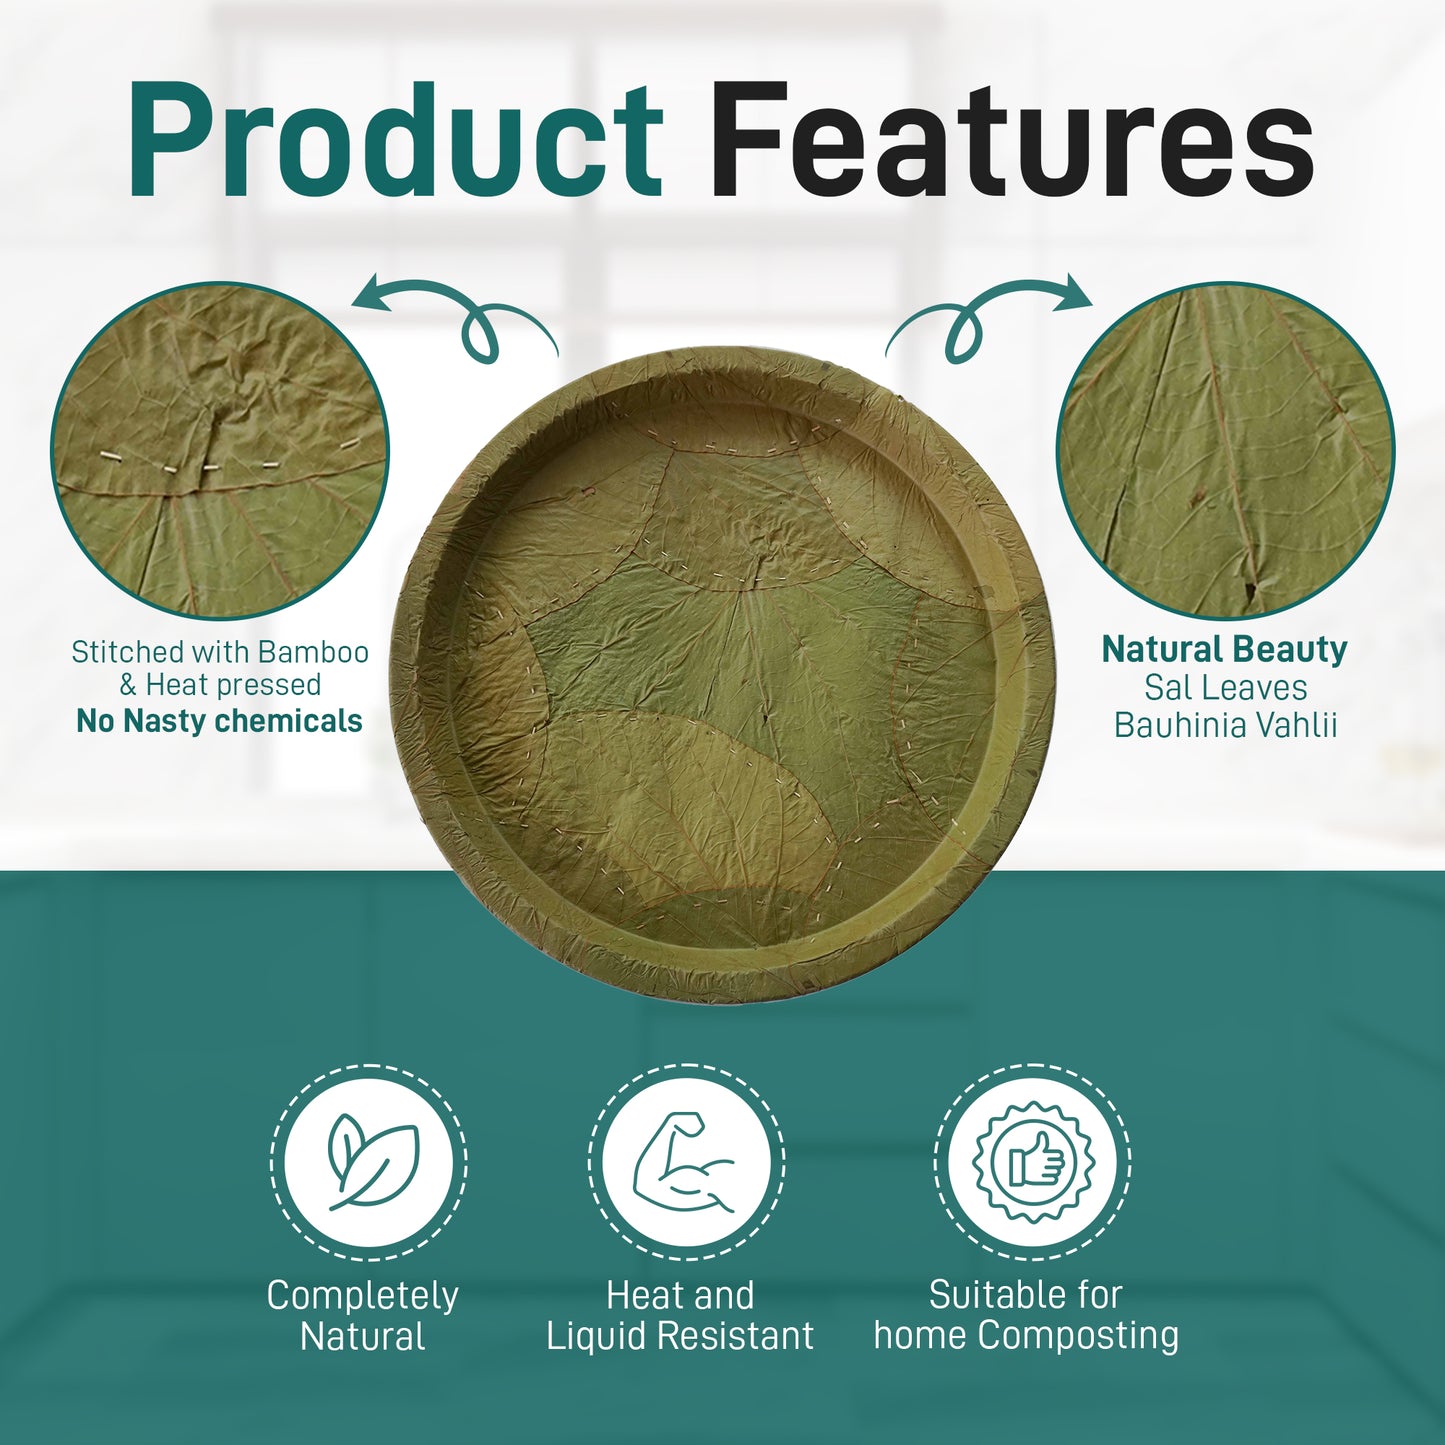 Eco-Friendly Vistaraku Leaf Plate Set - Siali (Bauhinia vahlii) and Palash Leaves | Biodegradable Disposable Plates for Parties, Weddings, BBQs & Traditional Events| Zero Waste | 16-inch Size | Pack of 25